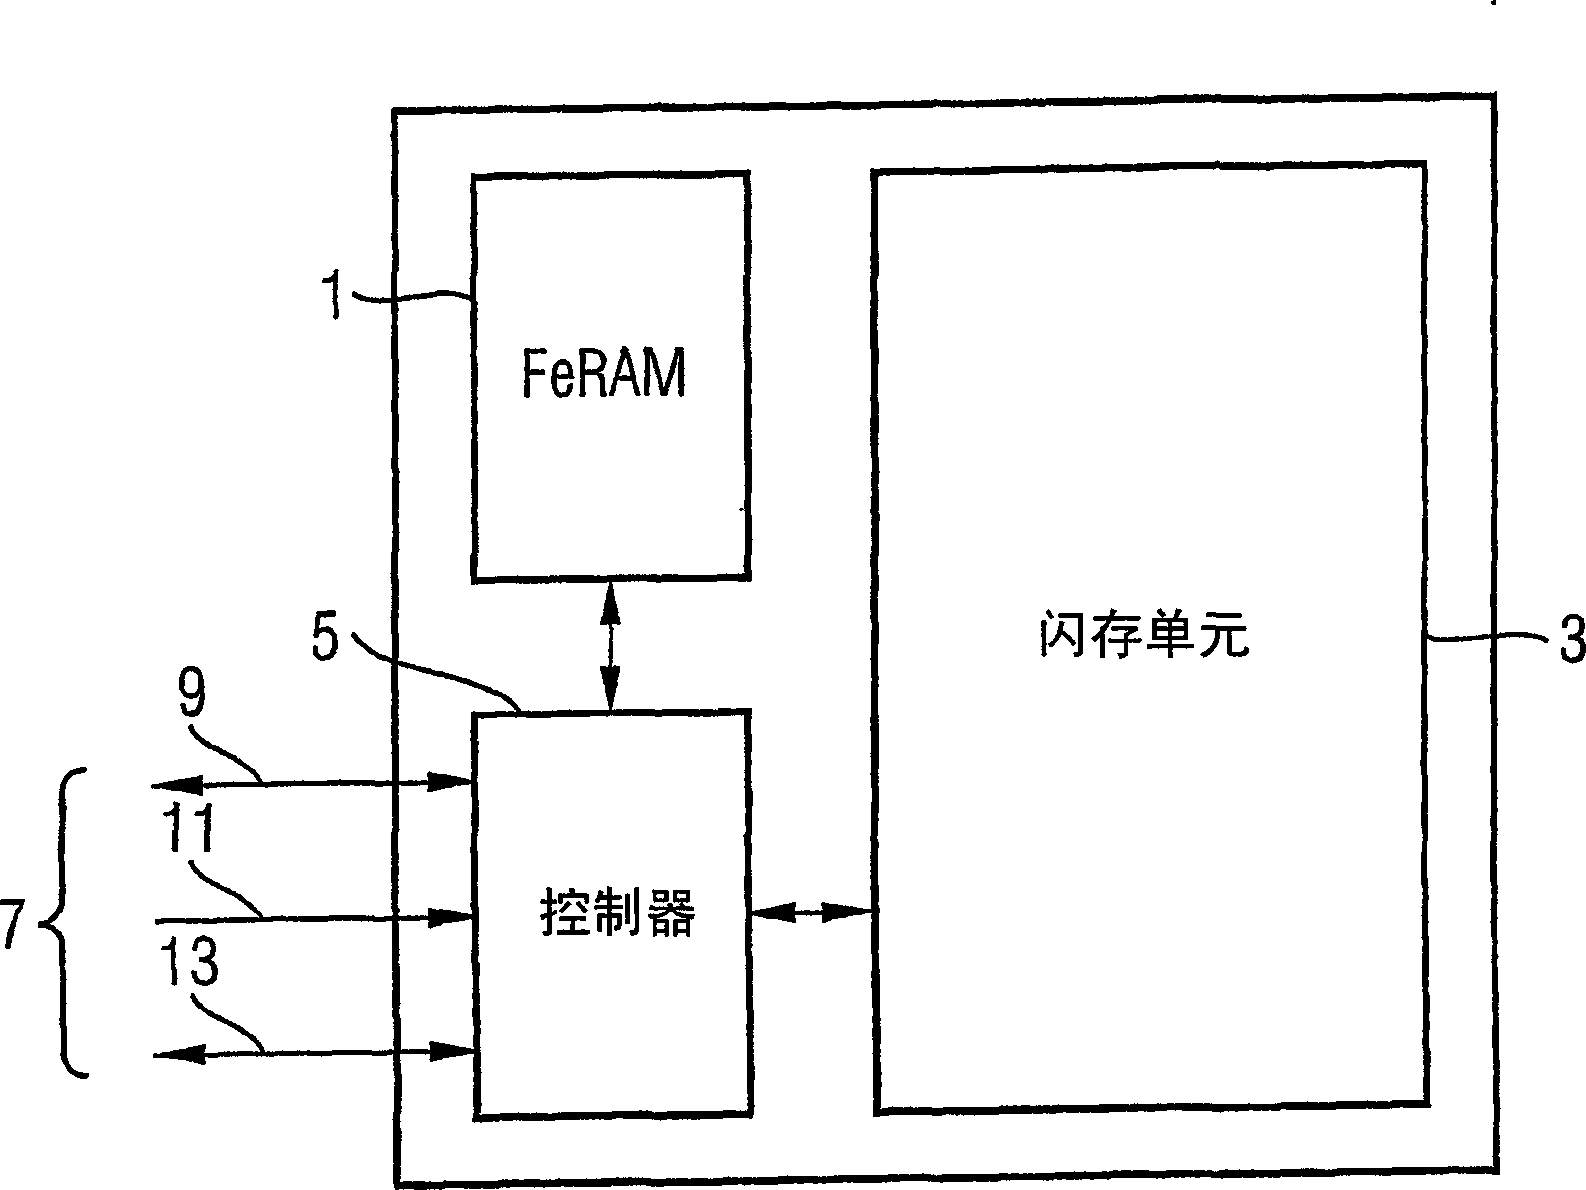 High density flash memory with high speed cache data interface